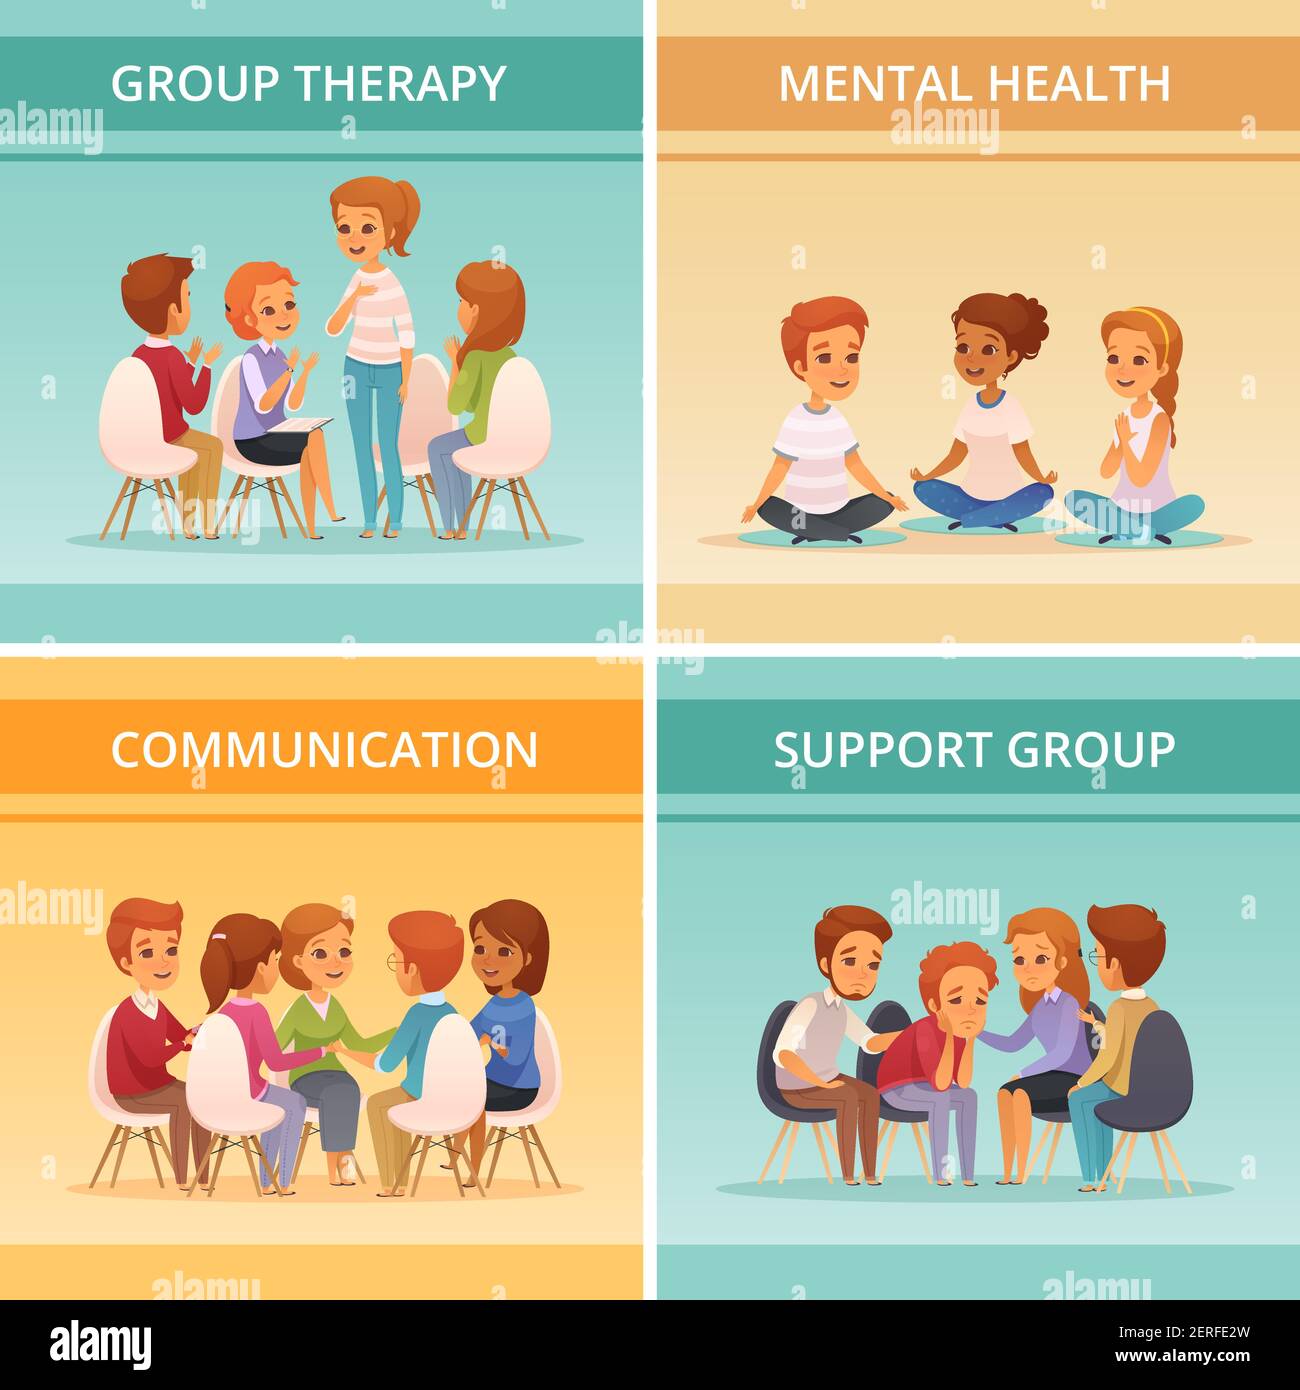 Four Squares Cartoon Group Therapy Icon Set With Mental Health Communication And Support Group Descriptions Vector Illustration Stock Vector Image Art - Alamy